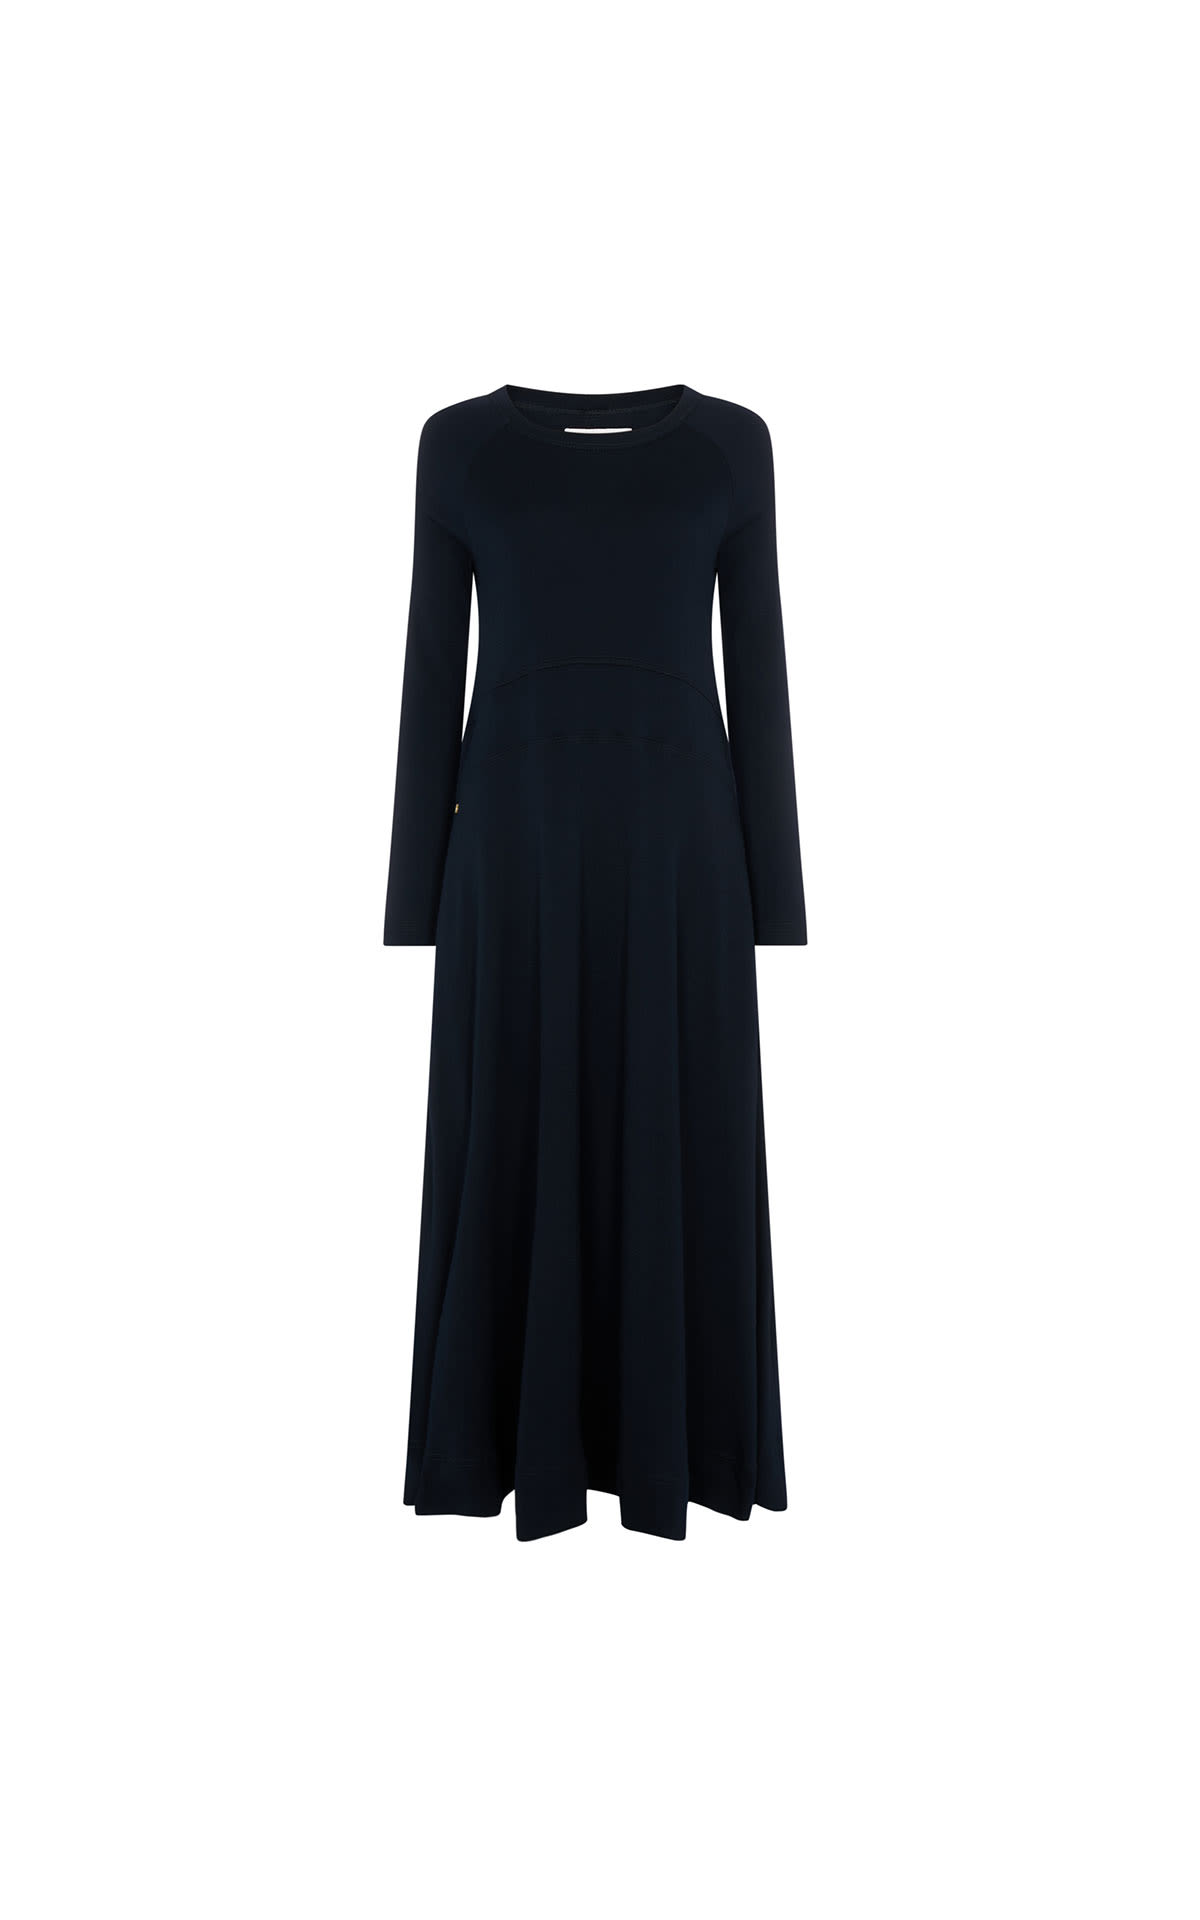 Bamford Griggs dress from Bicester Village